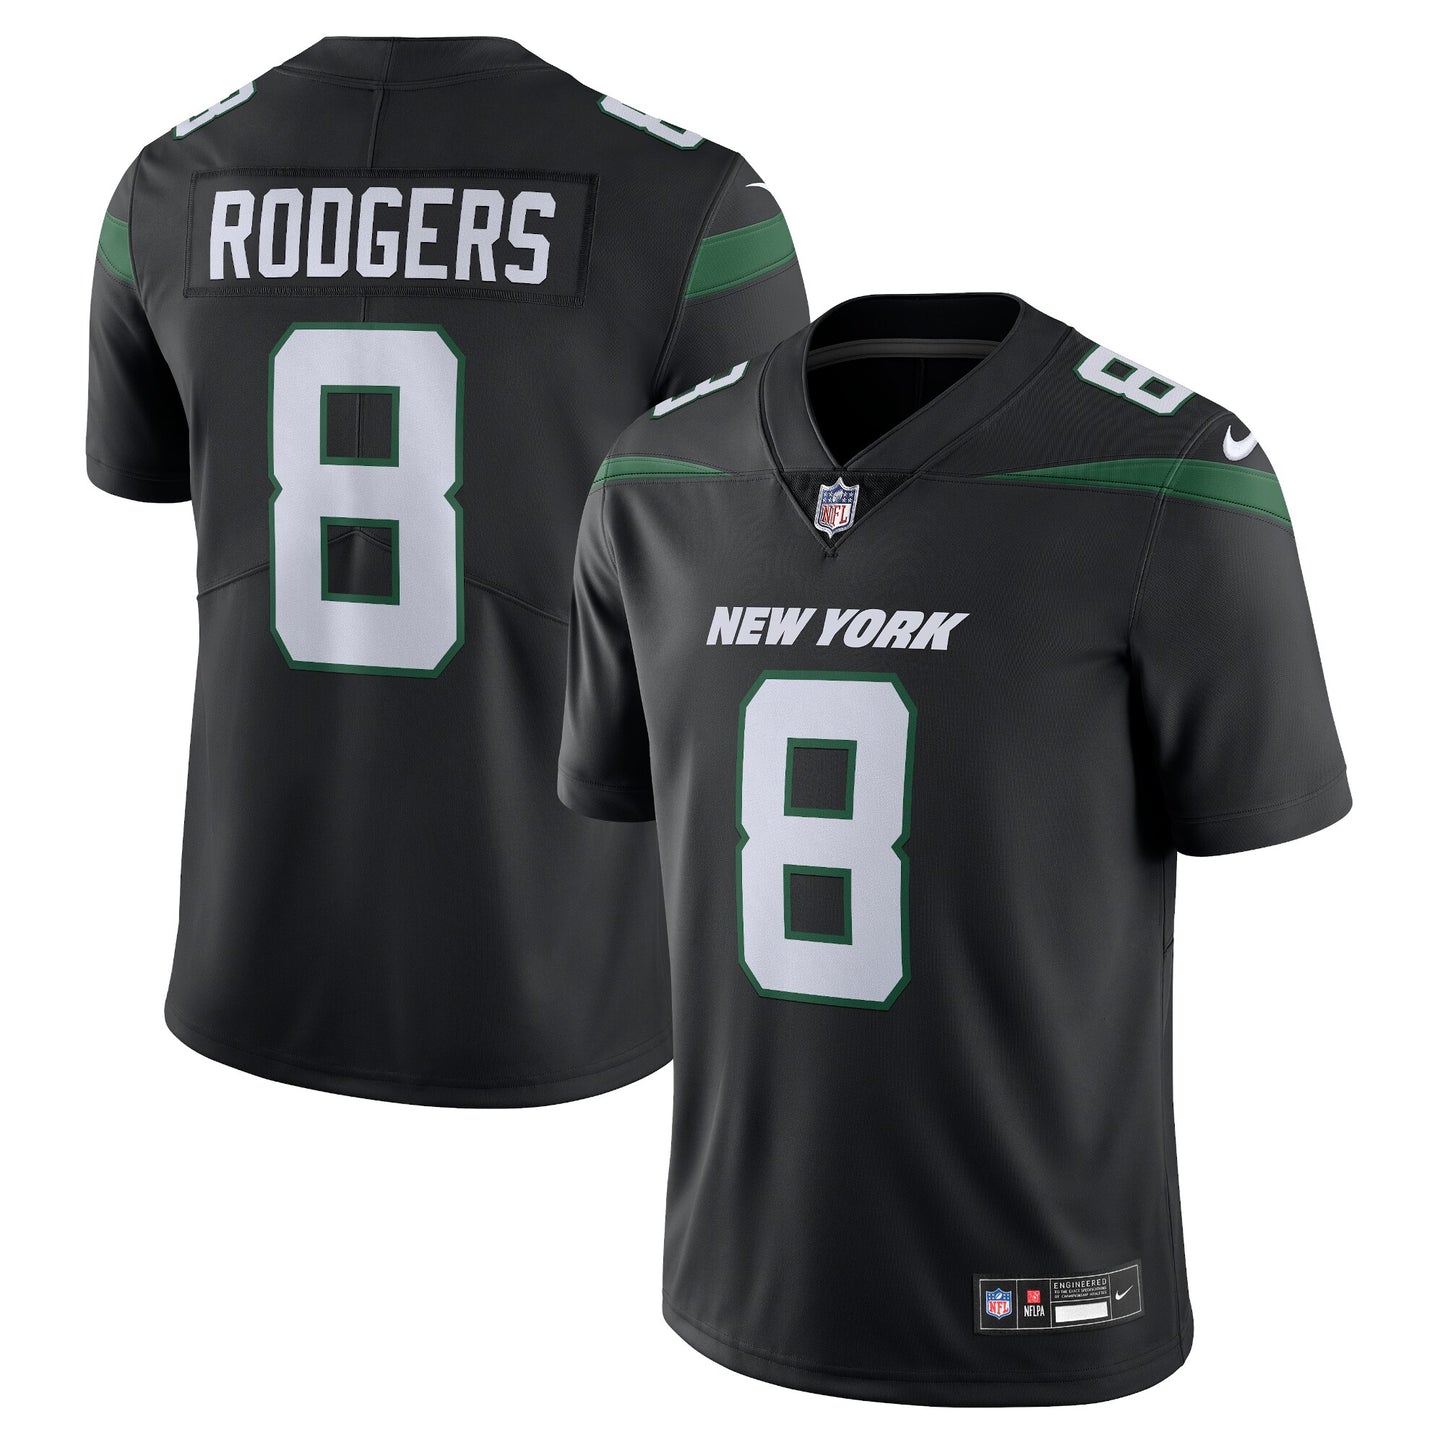 Aaron Rodgers New York Jets Nike Vapor Untouchable Limited Jersey - Black